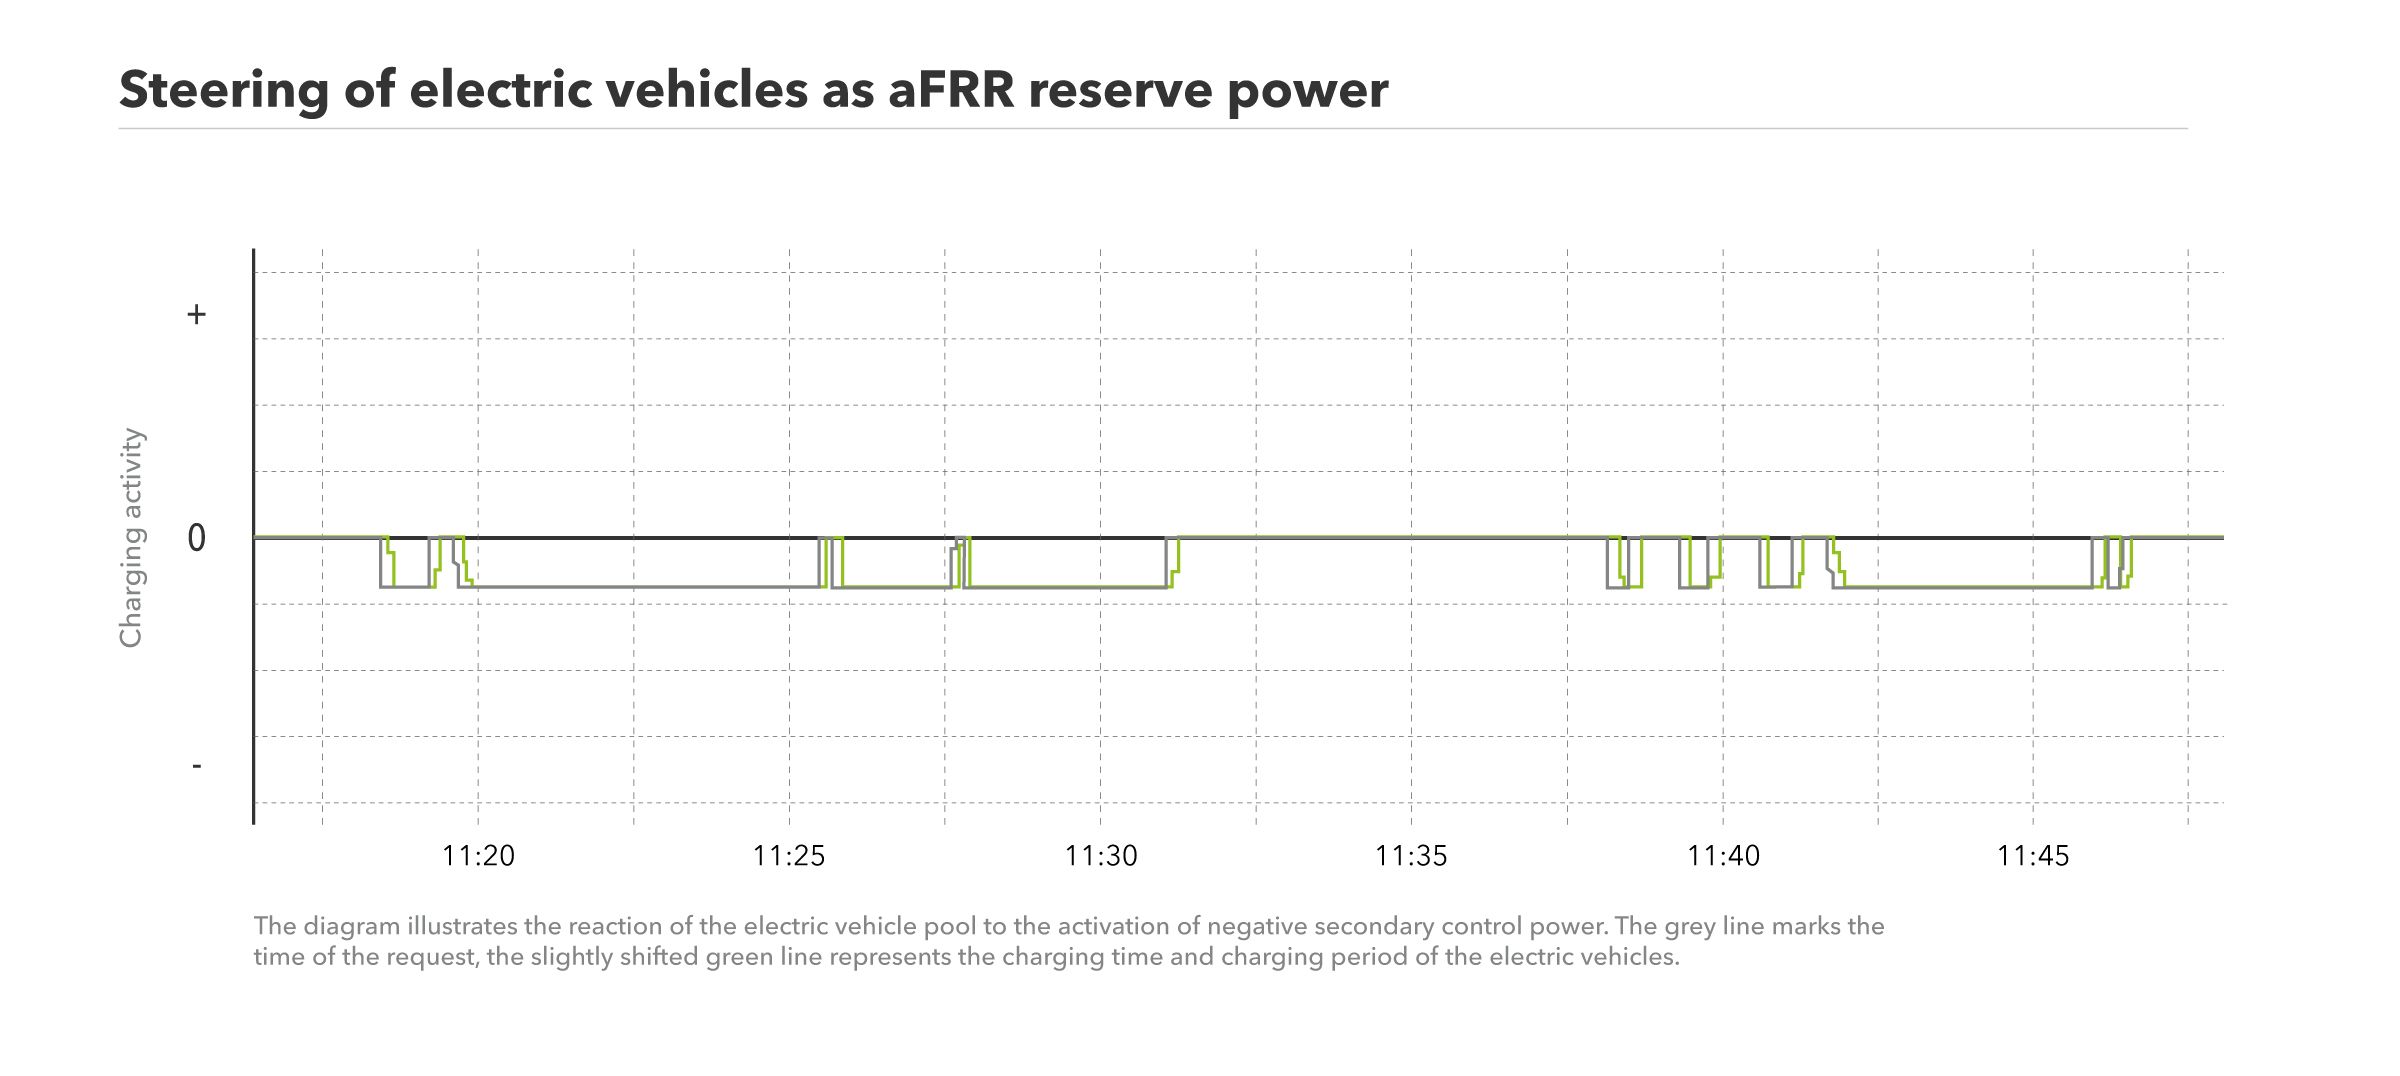 The graph shows the steering of electric vehicles as aFRR reserve power.